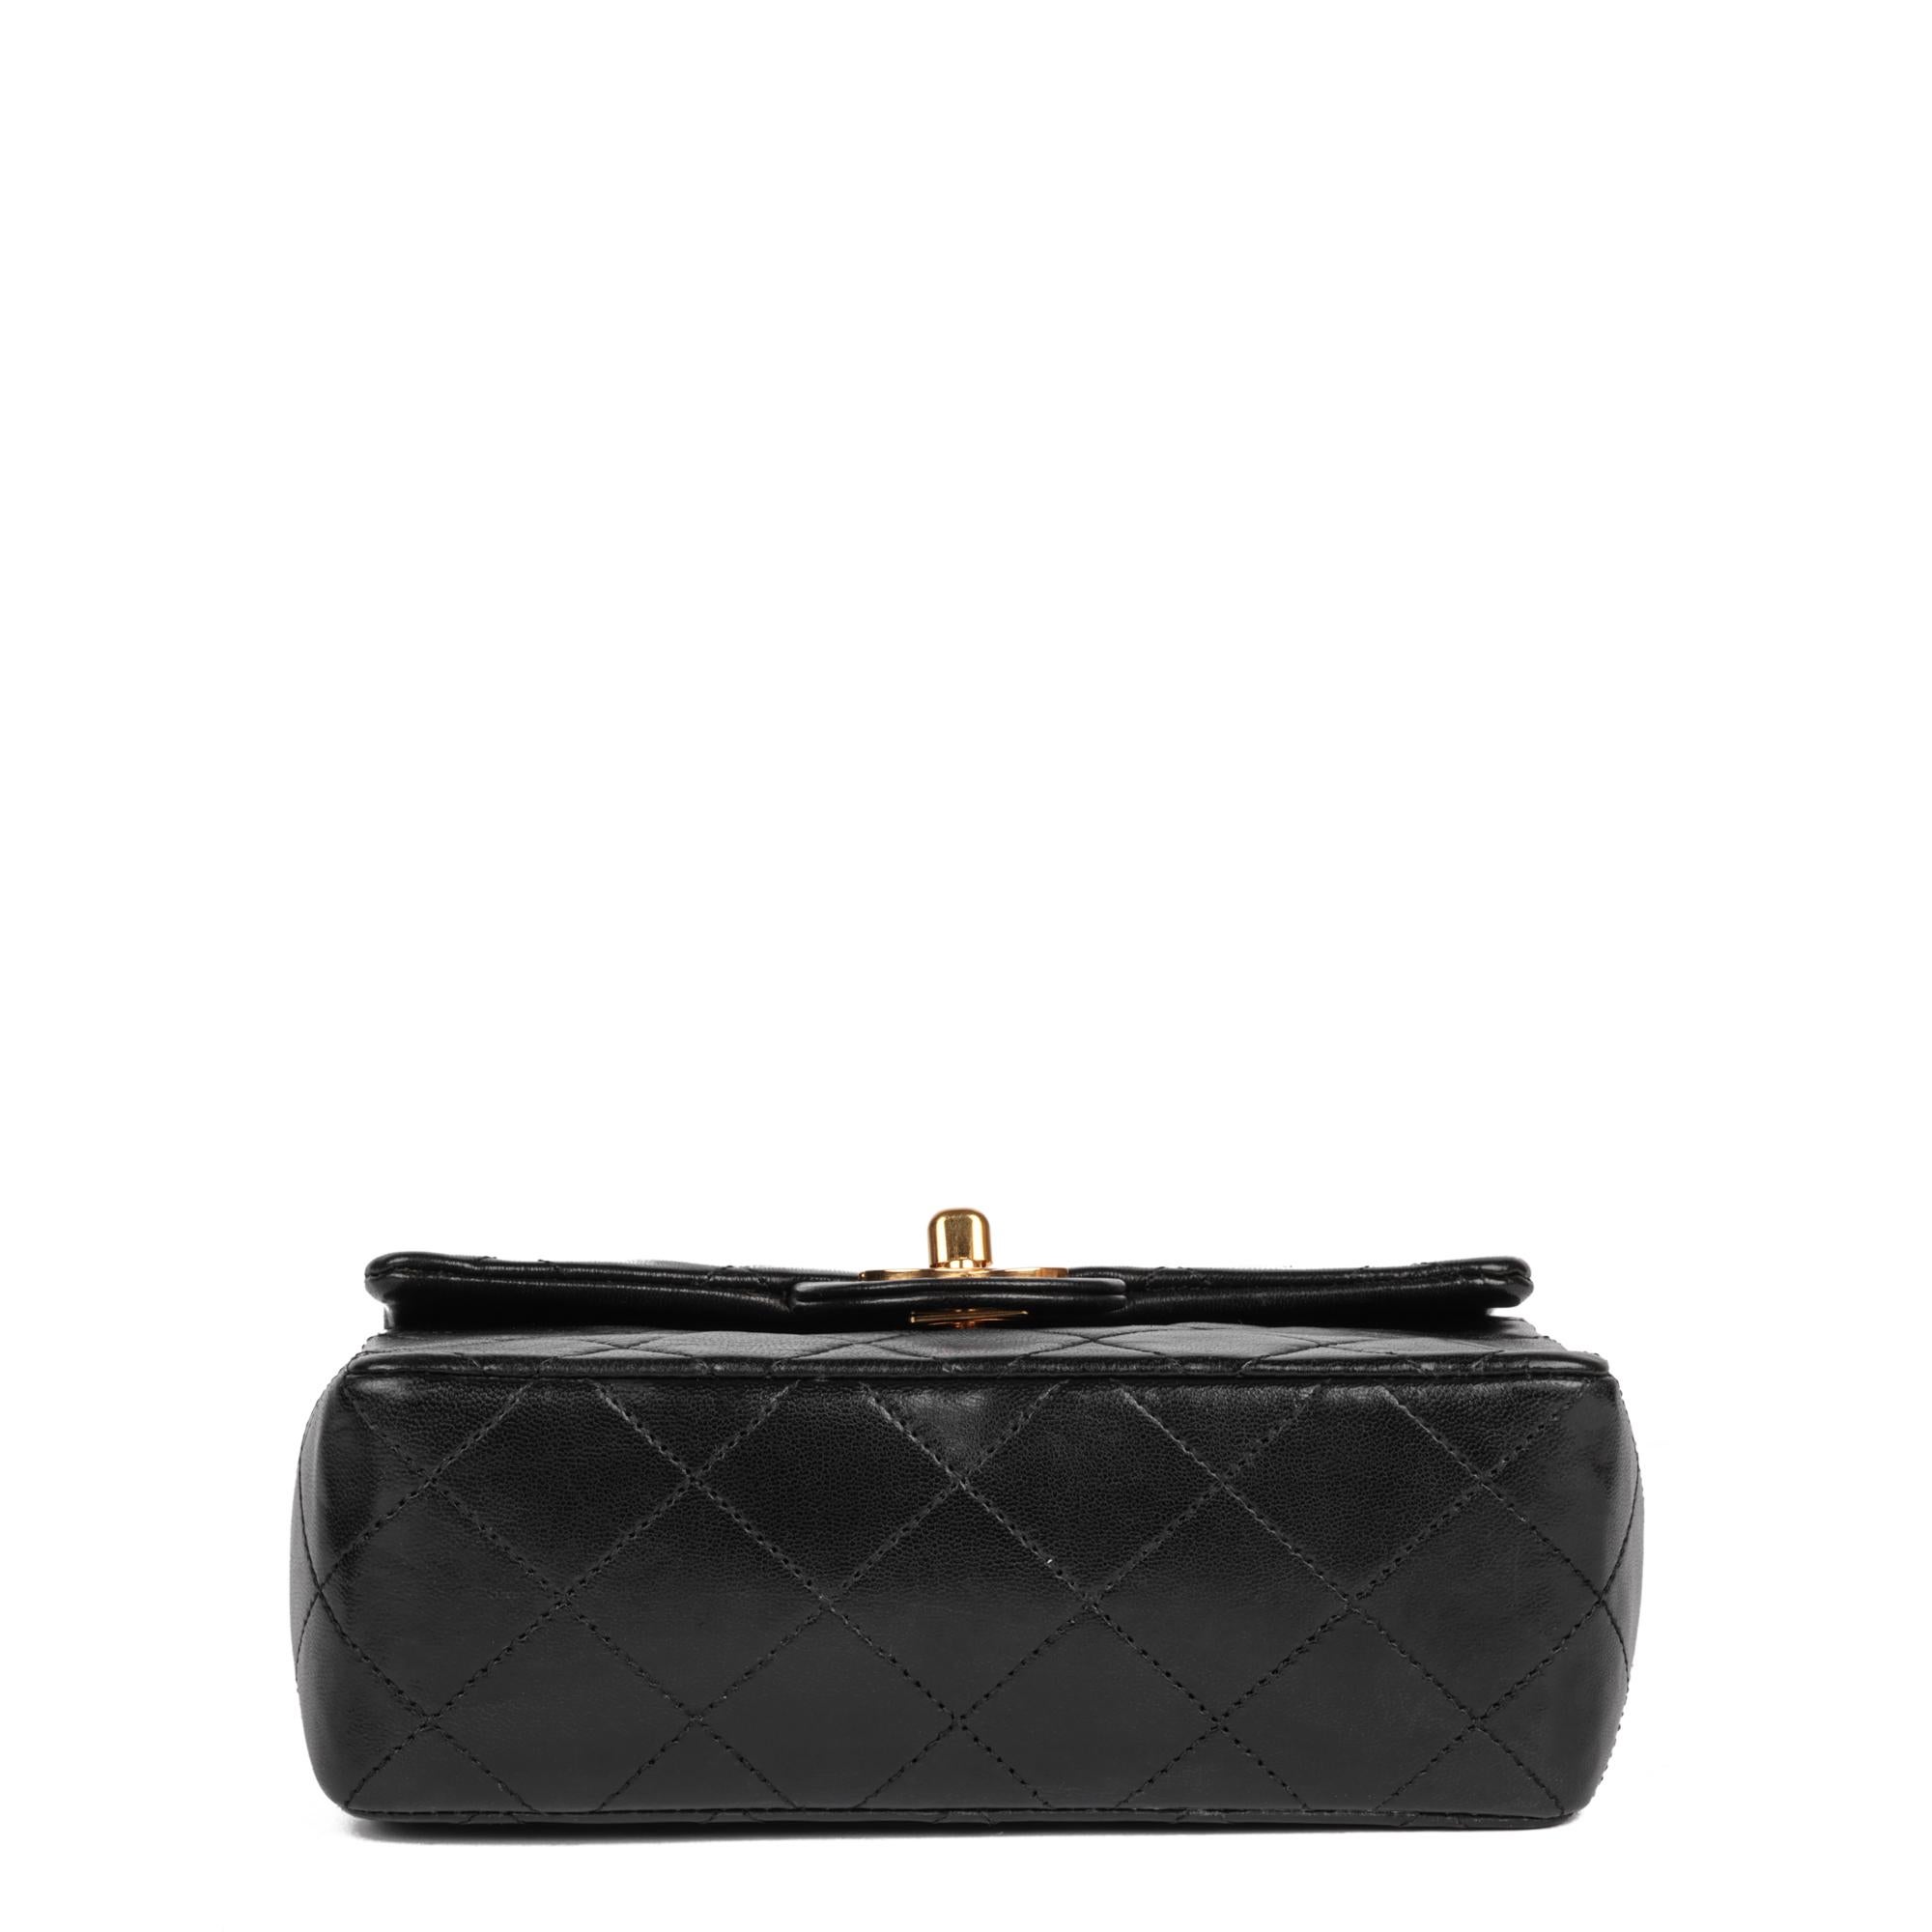 CHANEL Black Quilted Lambskin Vintage Square Mini Flap Bag 2